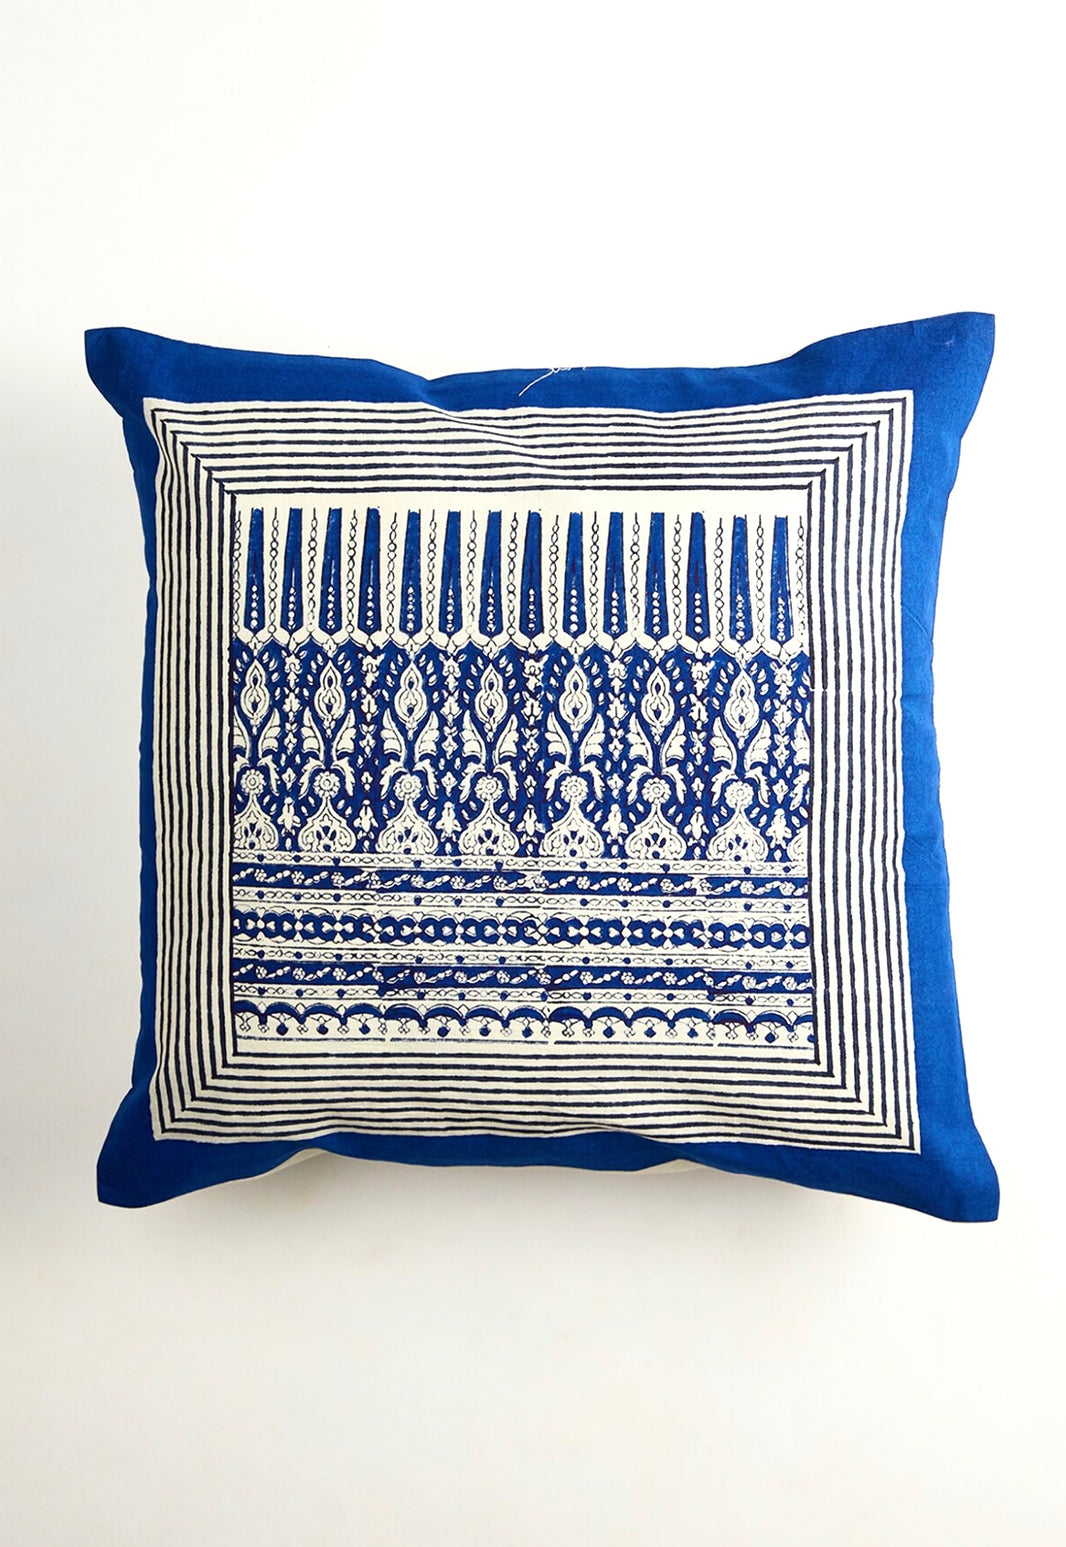 Transform Your Home with Handcrafted Textiles